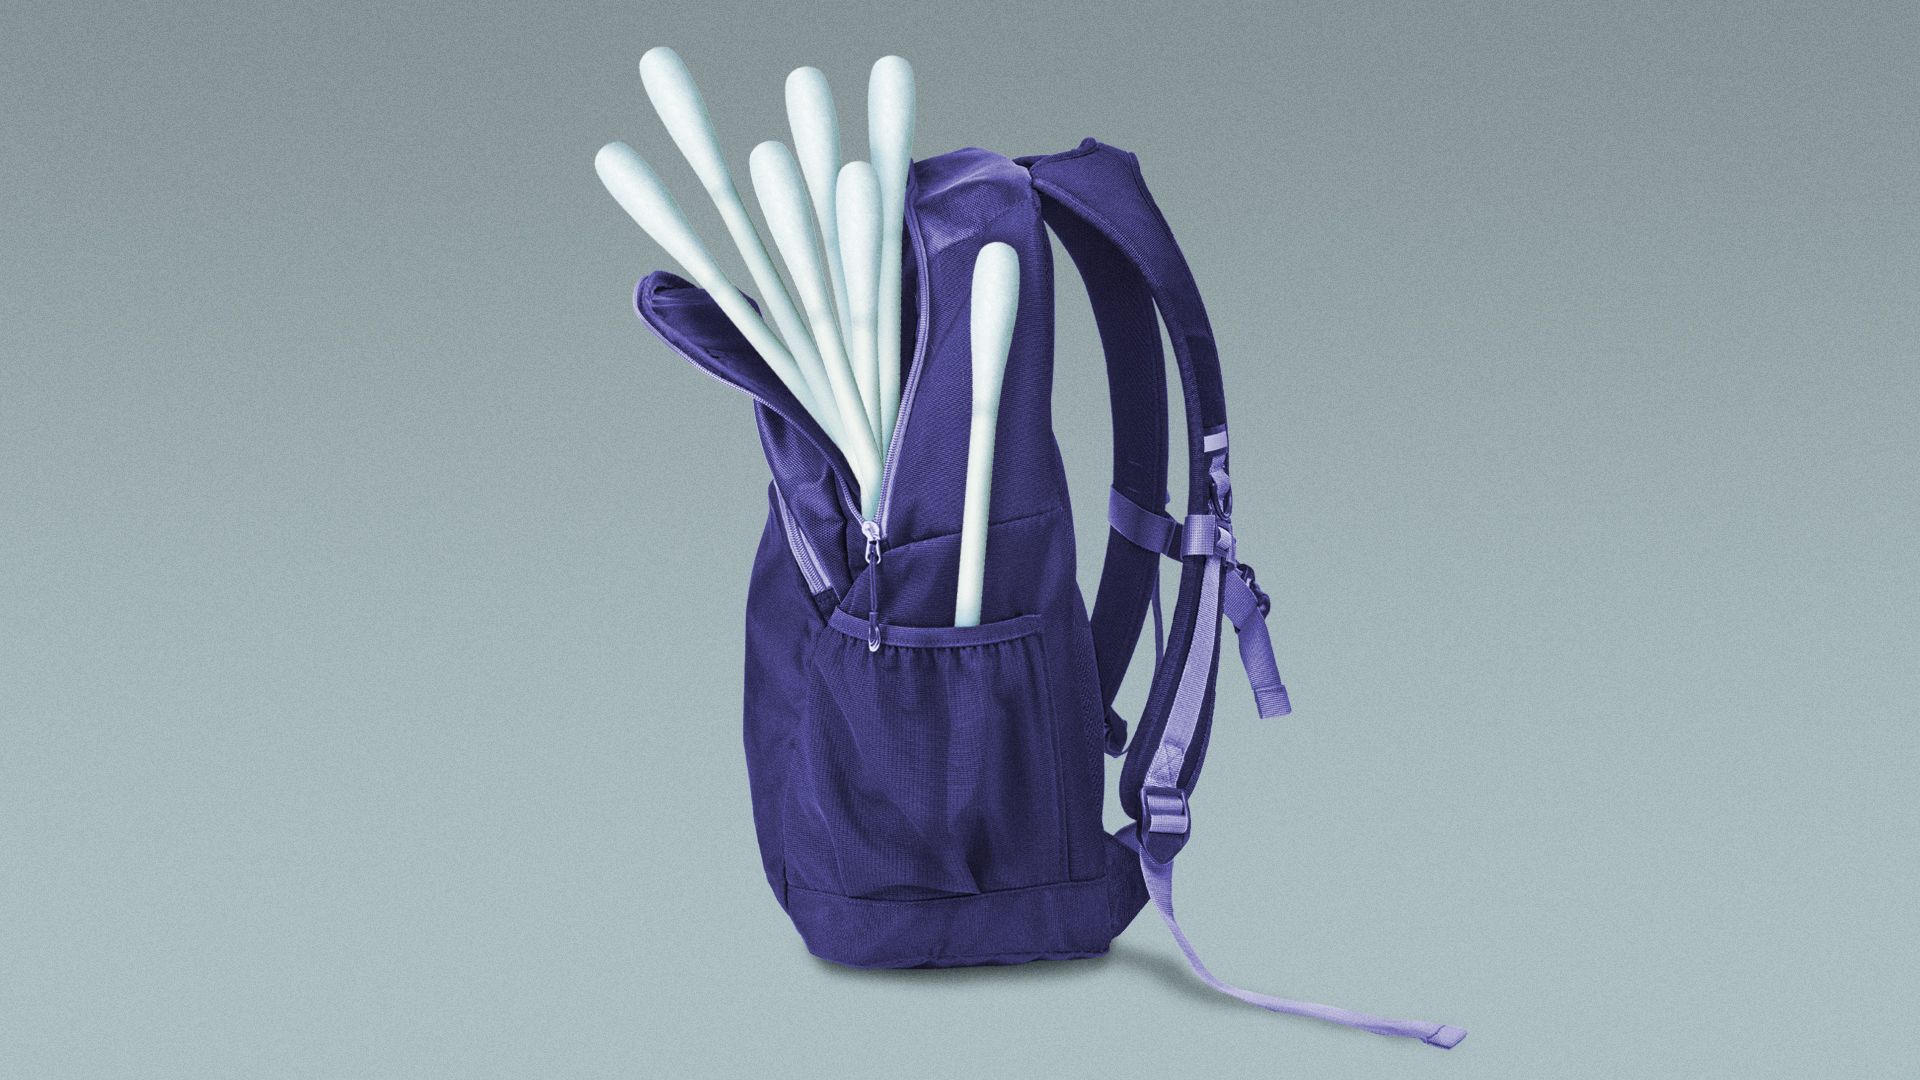 Illustration of a backpack filled with COVID-19 test swabs.